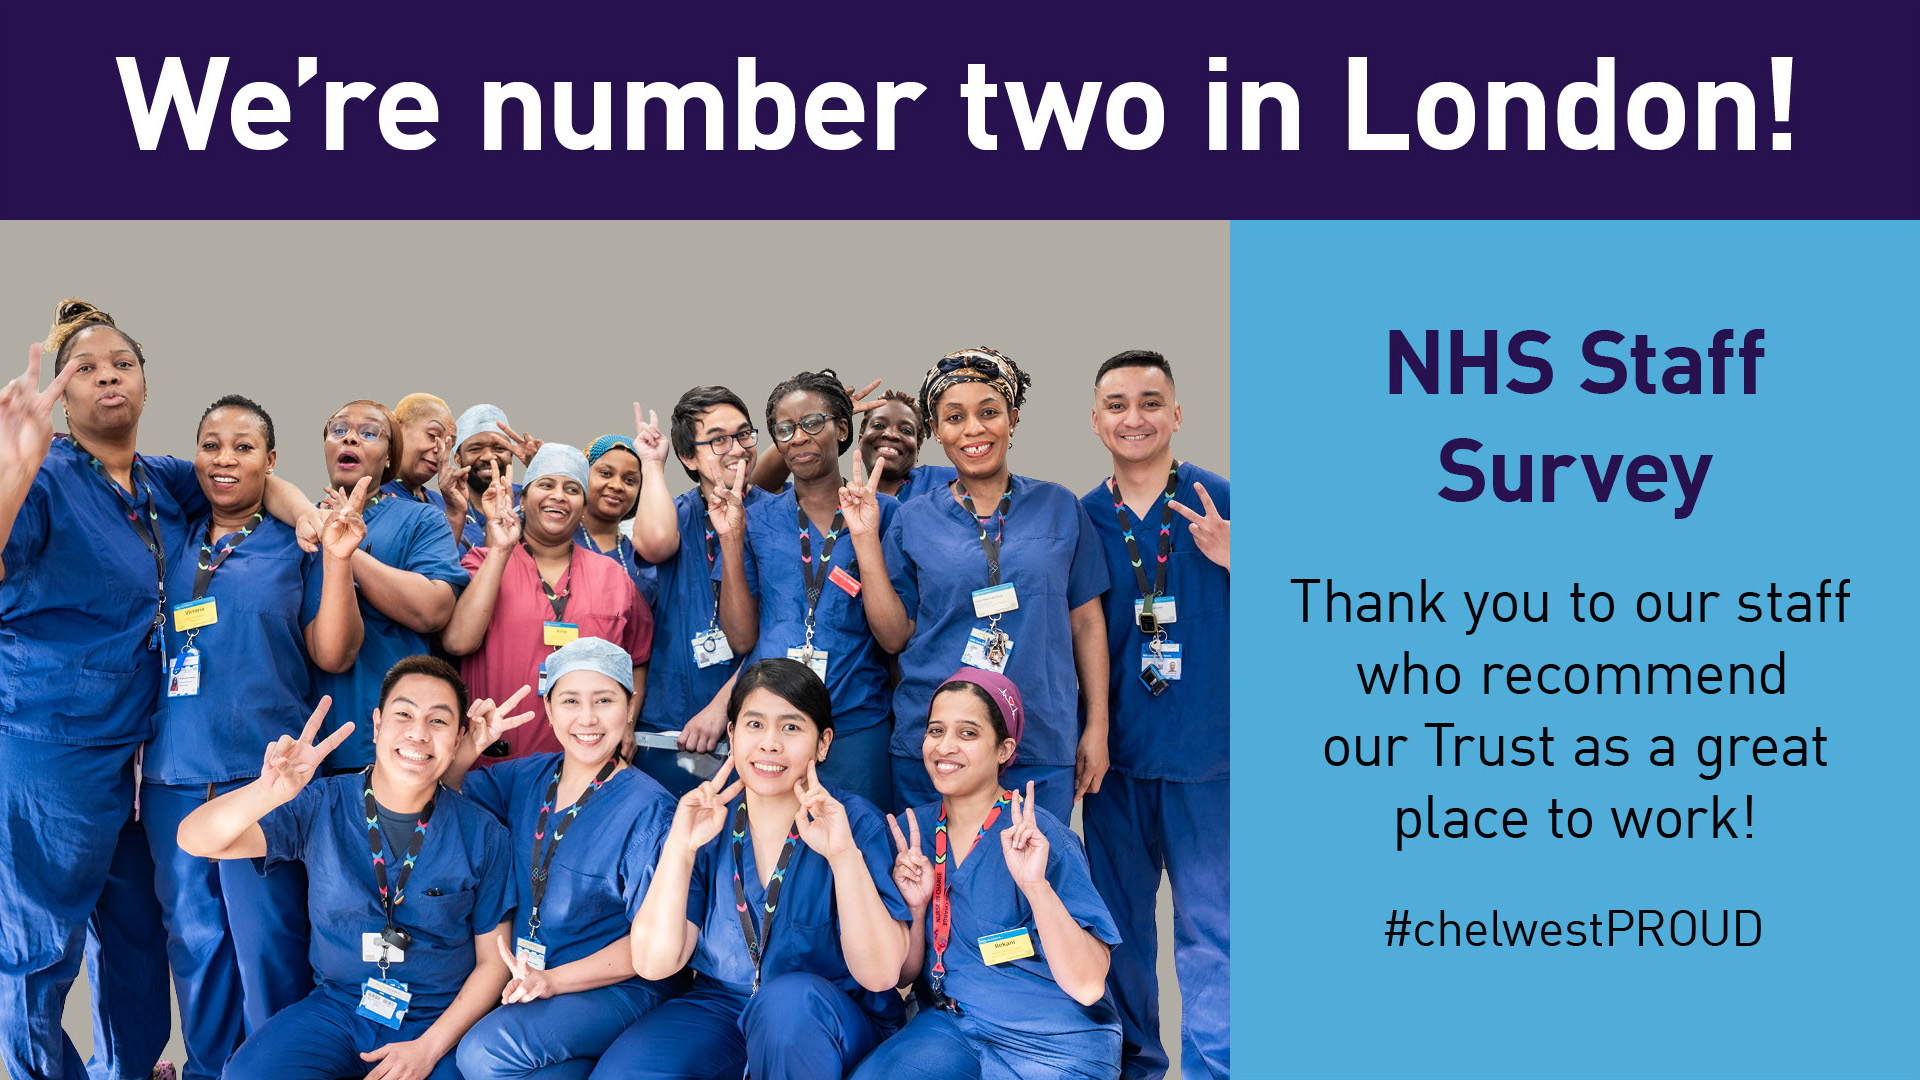 NHS Staff Survey results—staff recommend us as a top place to work